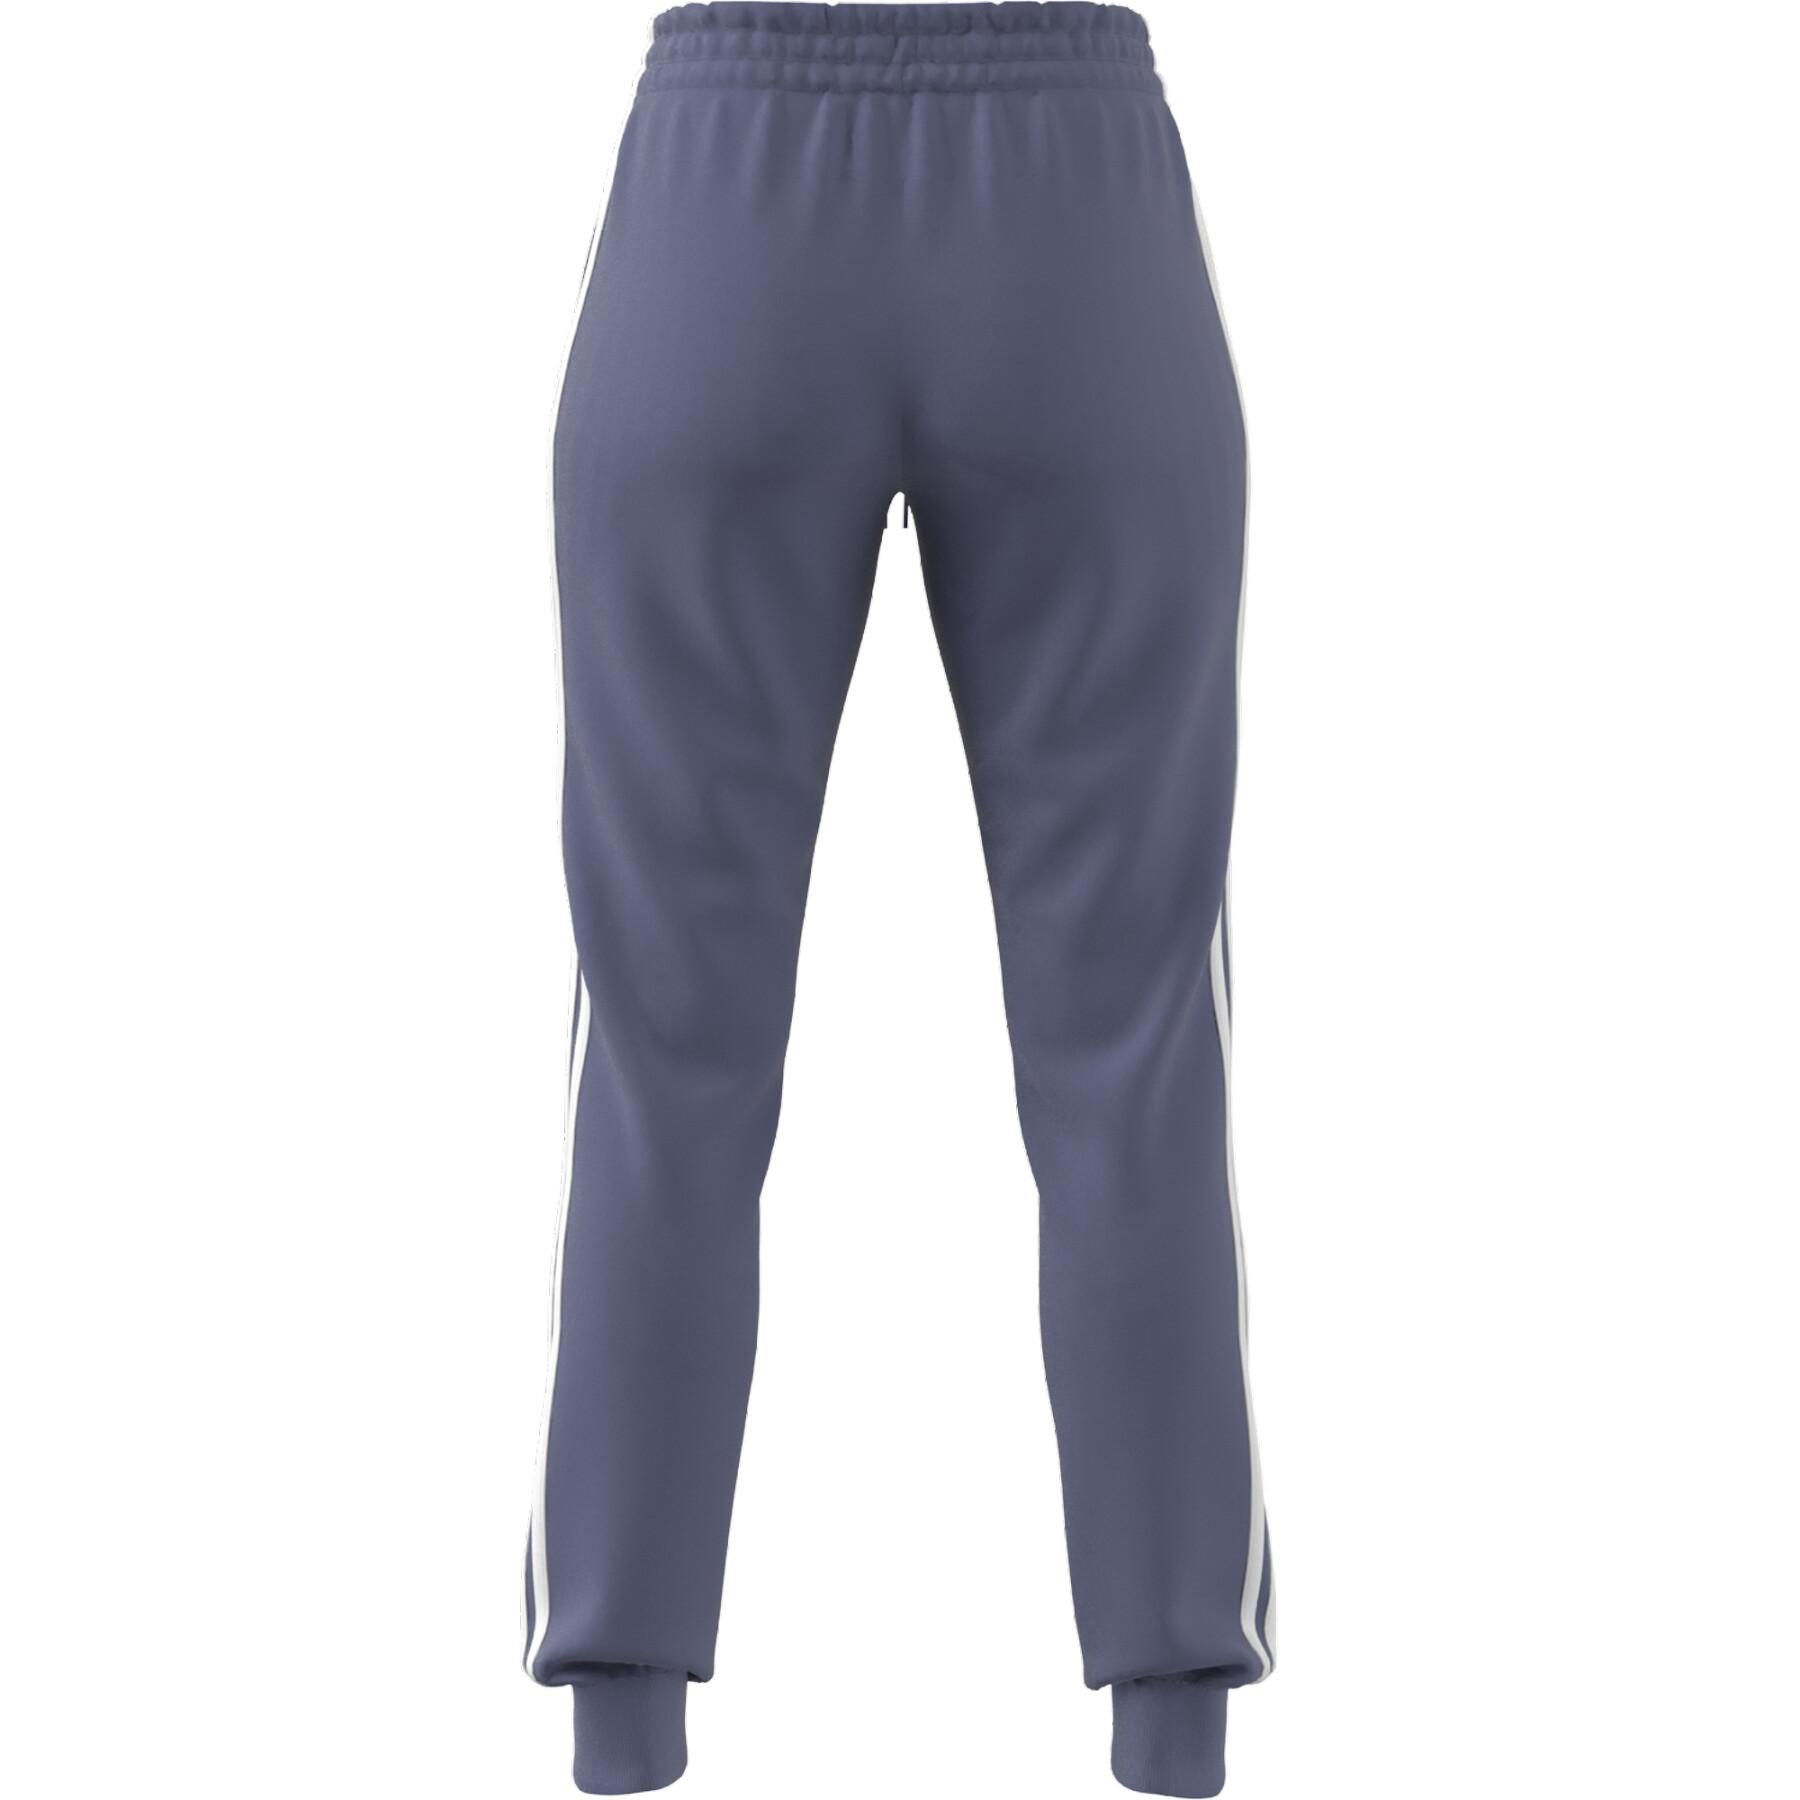 Women's trousers adidas Essentials French Terry